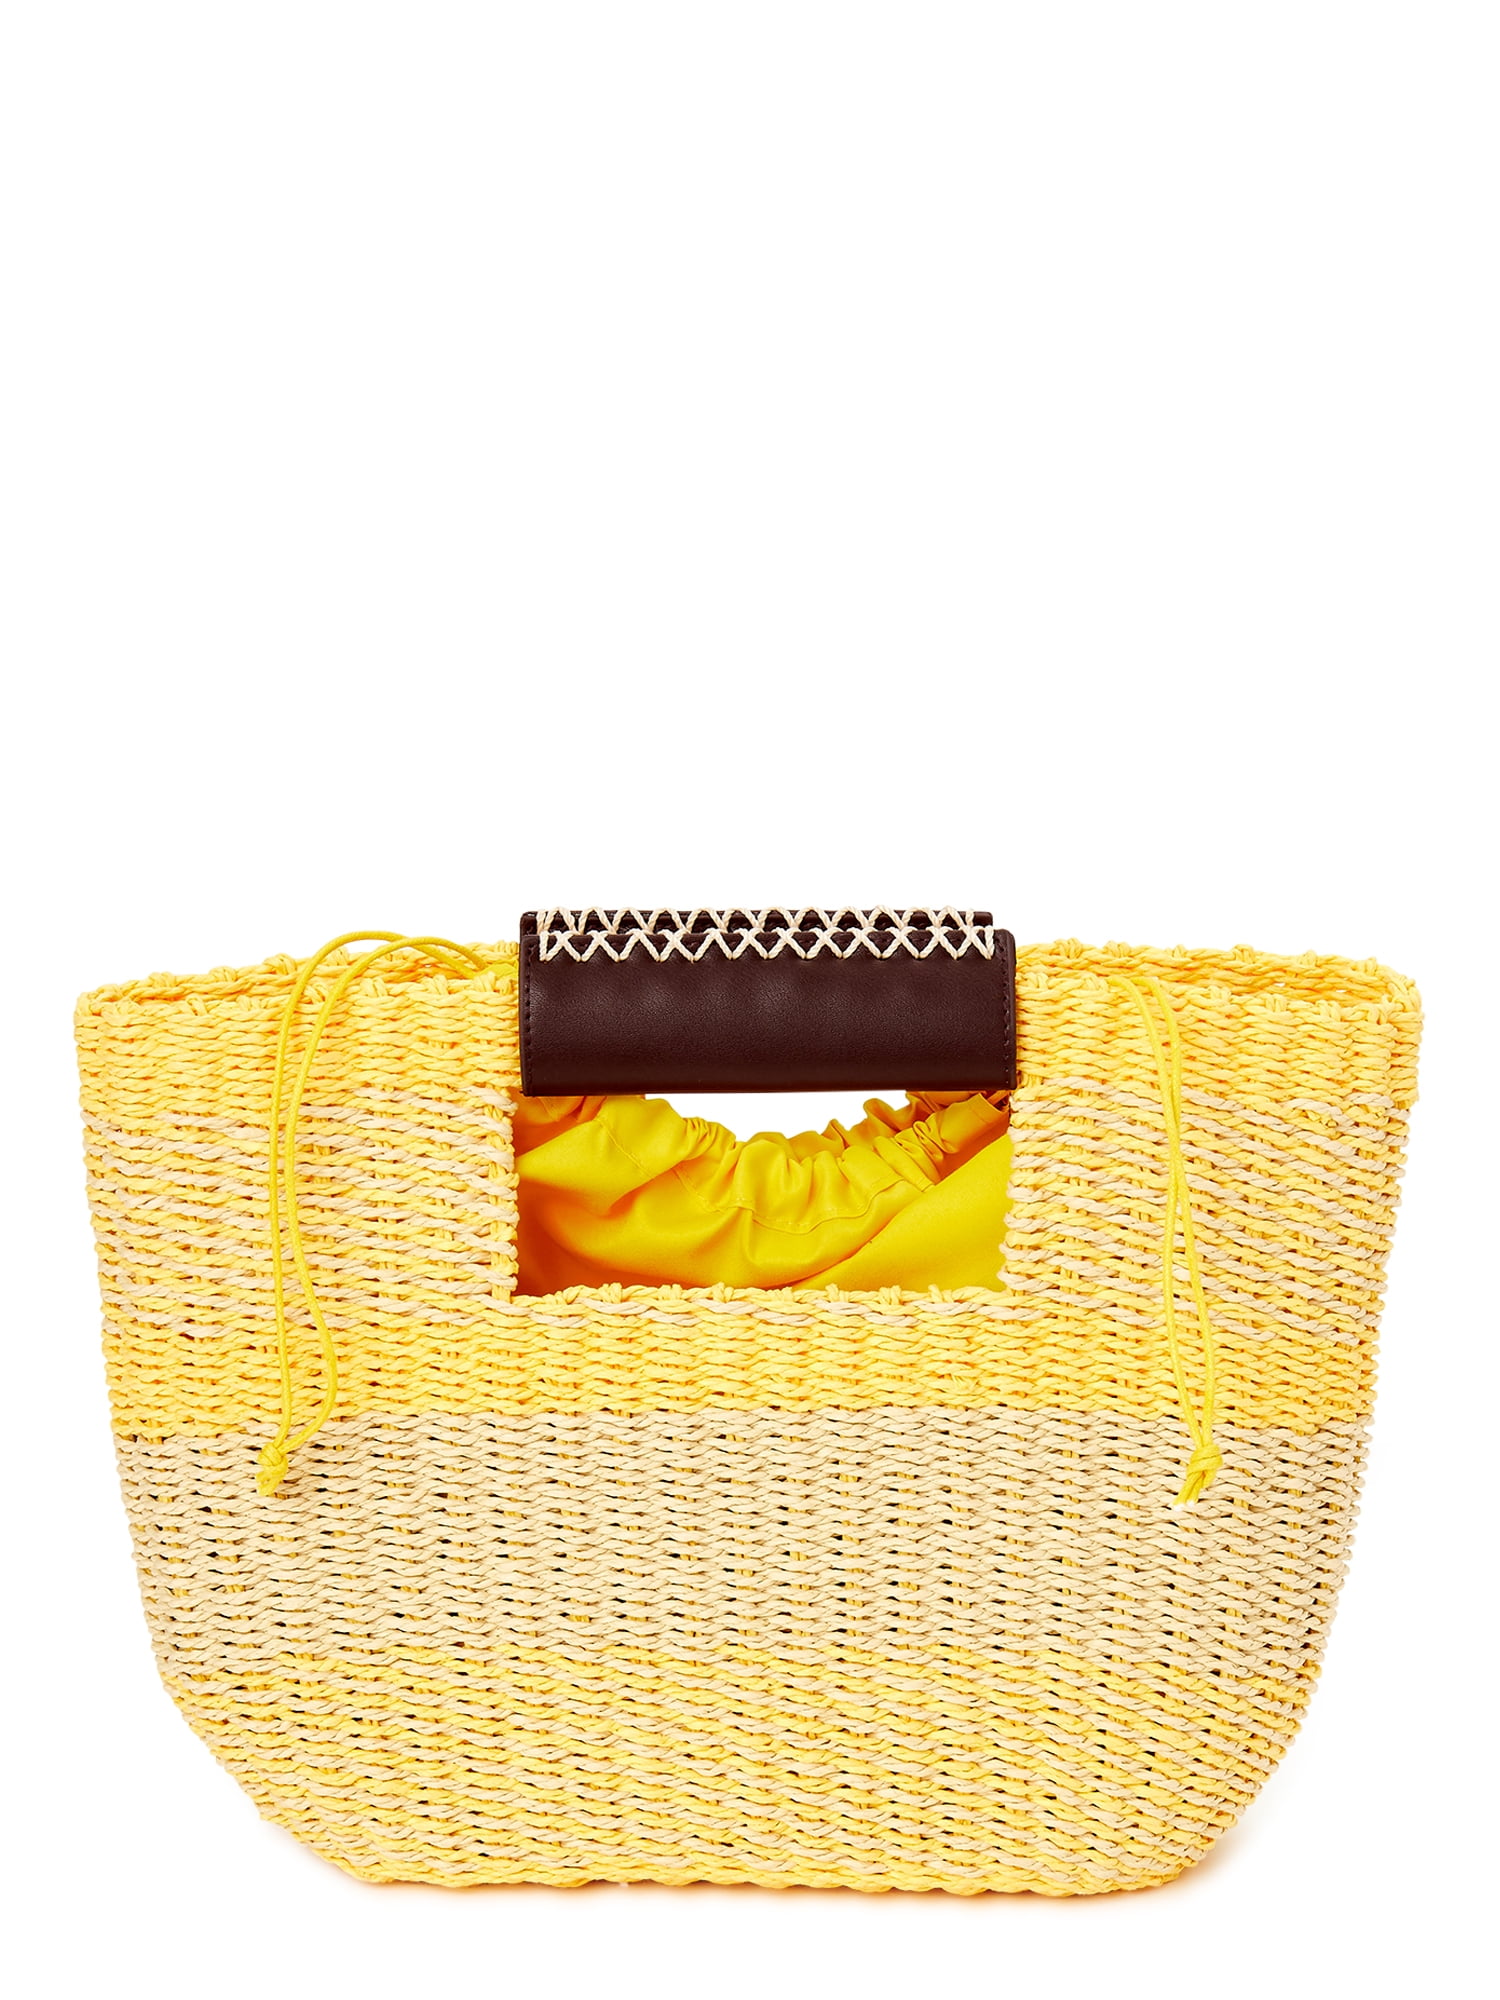 Scoop Womens Striped Bag, Women's, Size: One size, Yellow